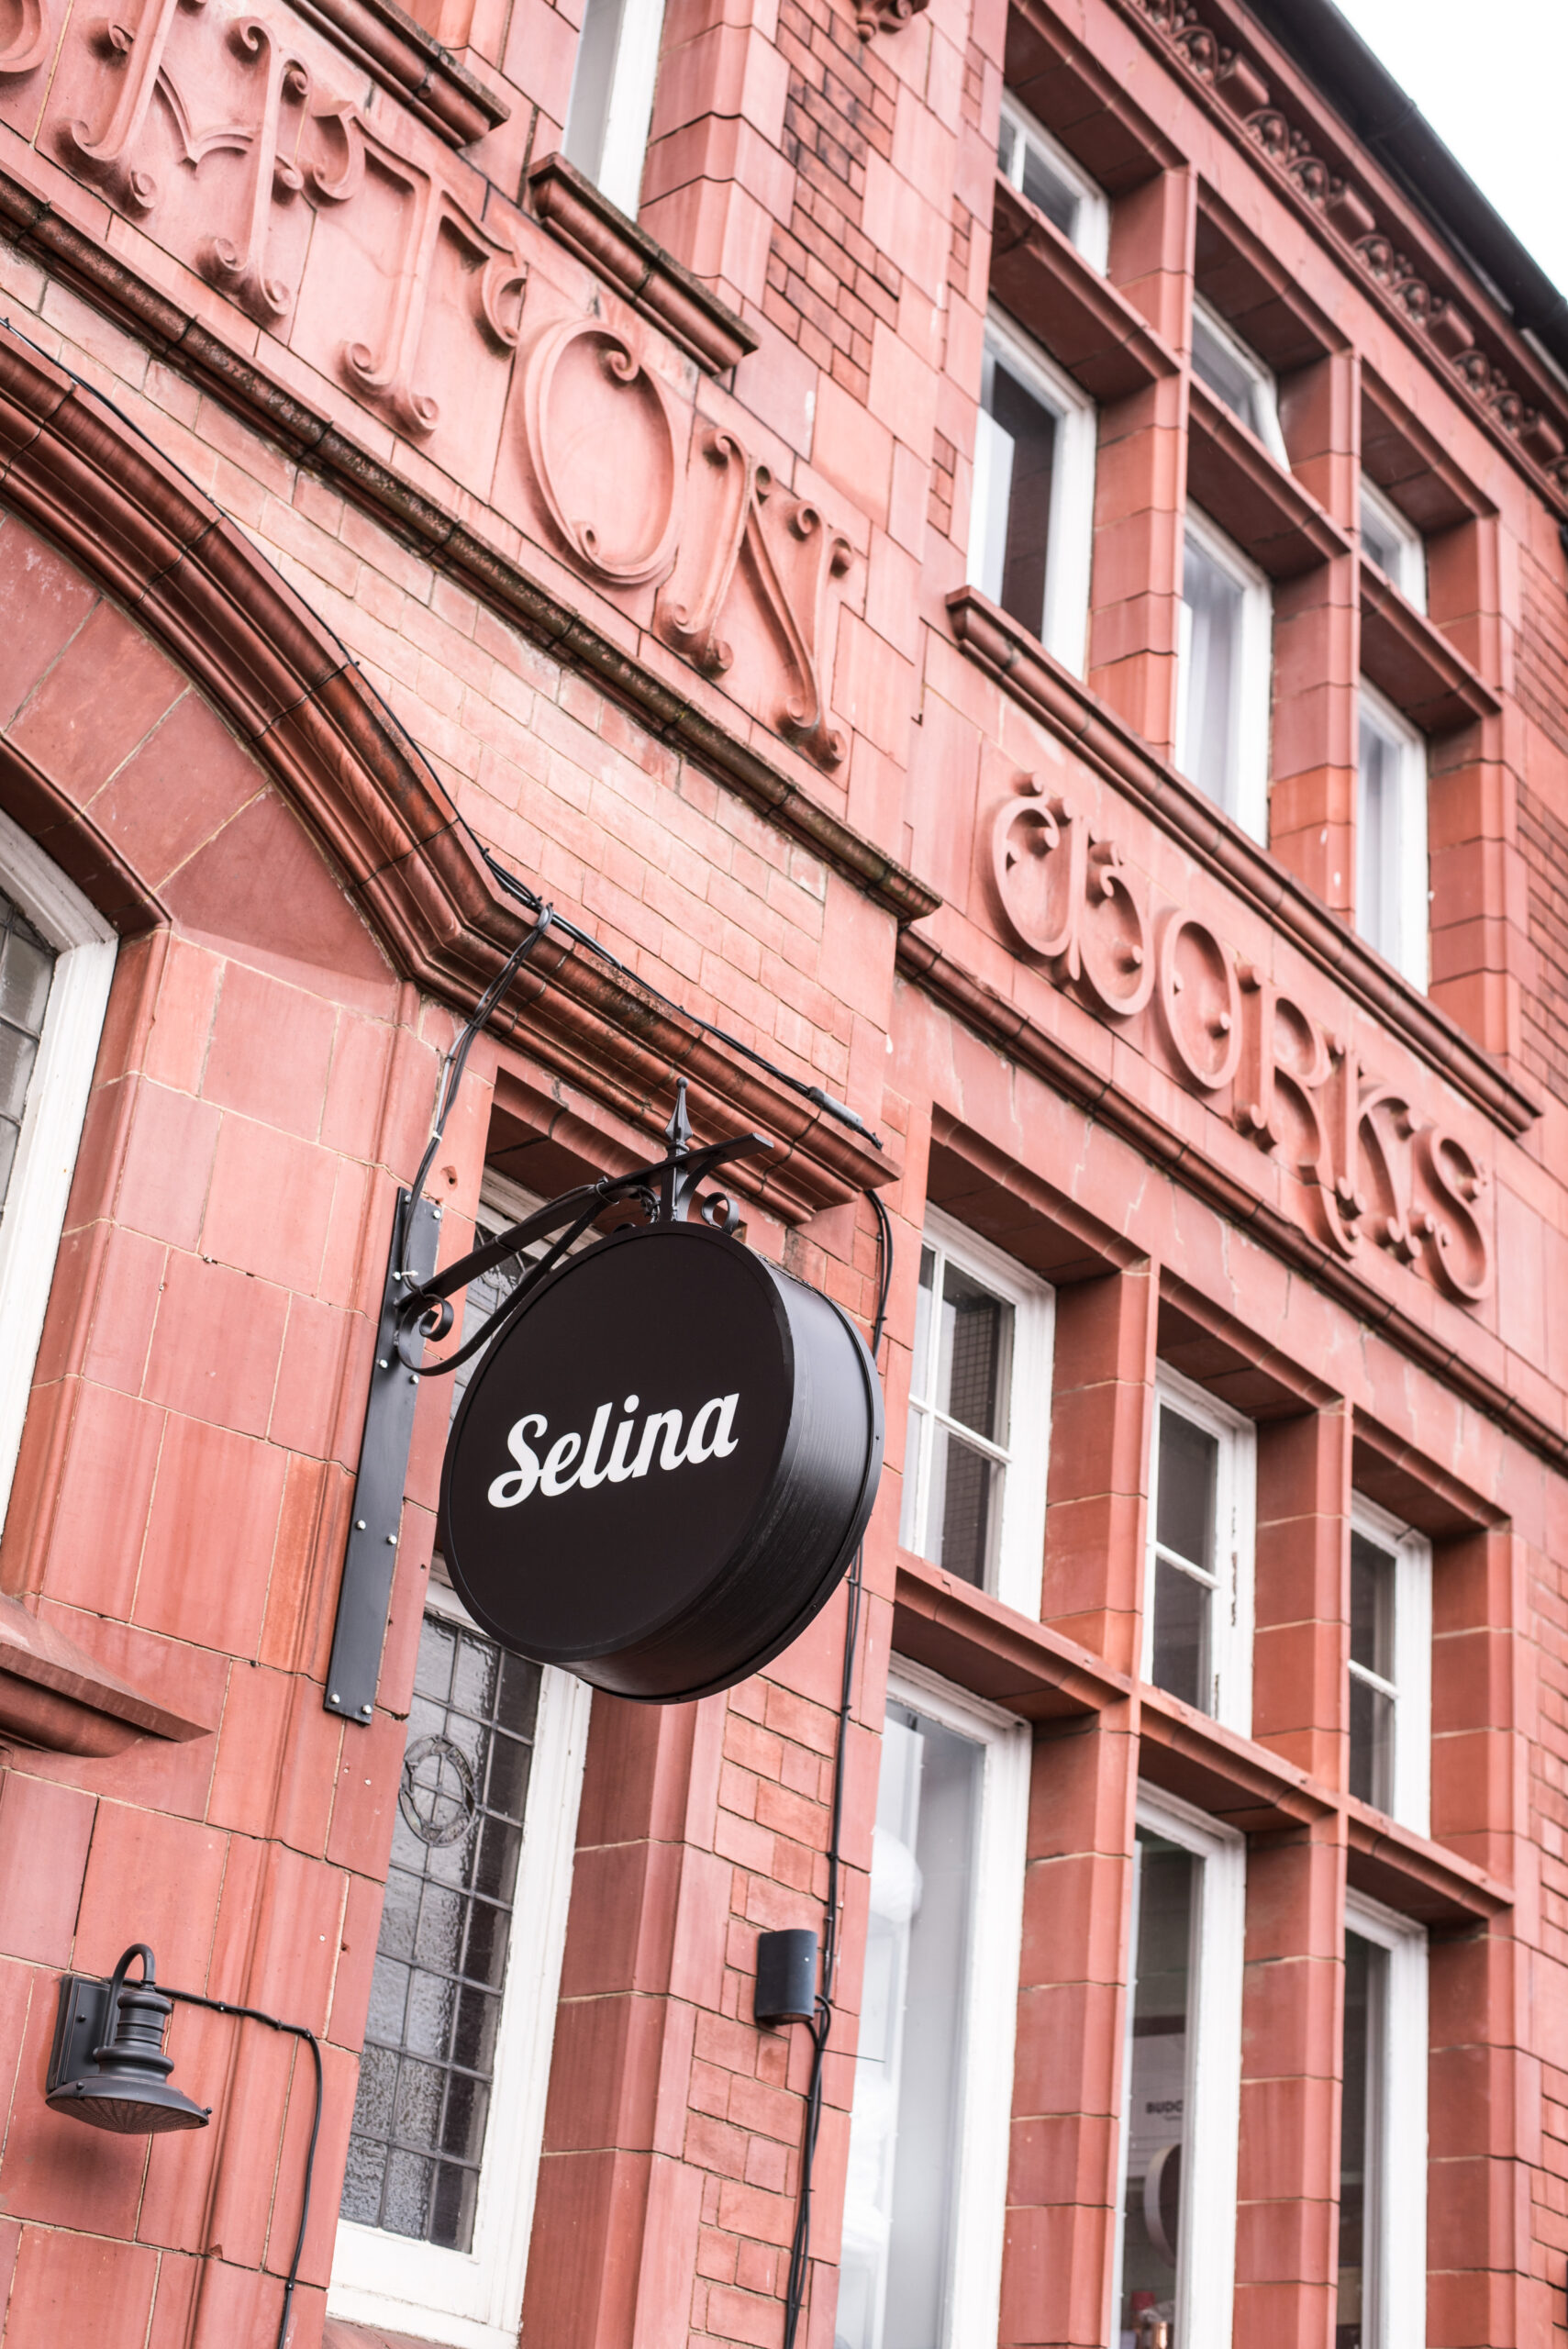 SELINA HOTELS UK ANNOUNCES EXCITING PARTNERSHIP WITH WEST MIDLANDS TRAINS